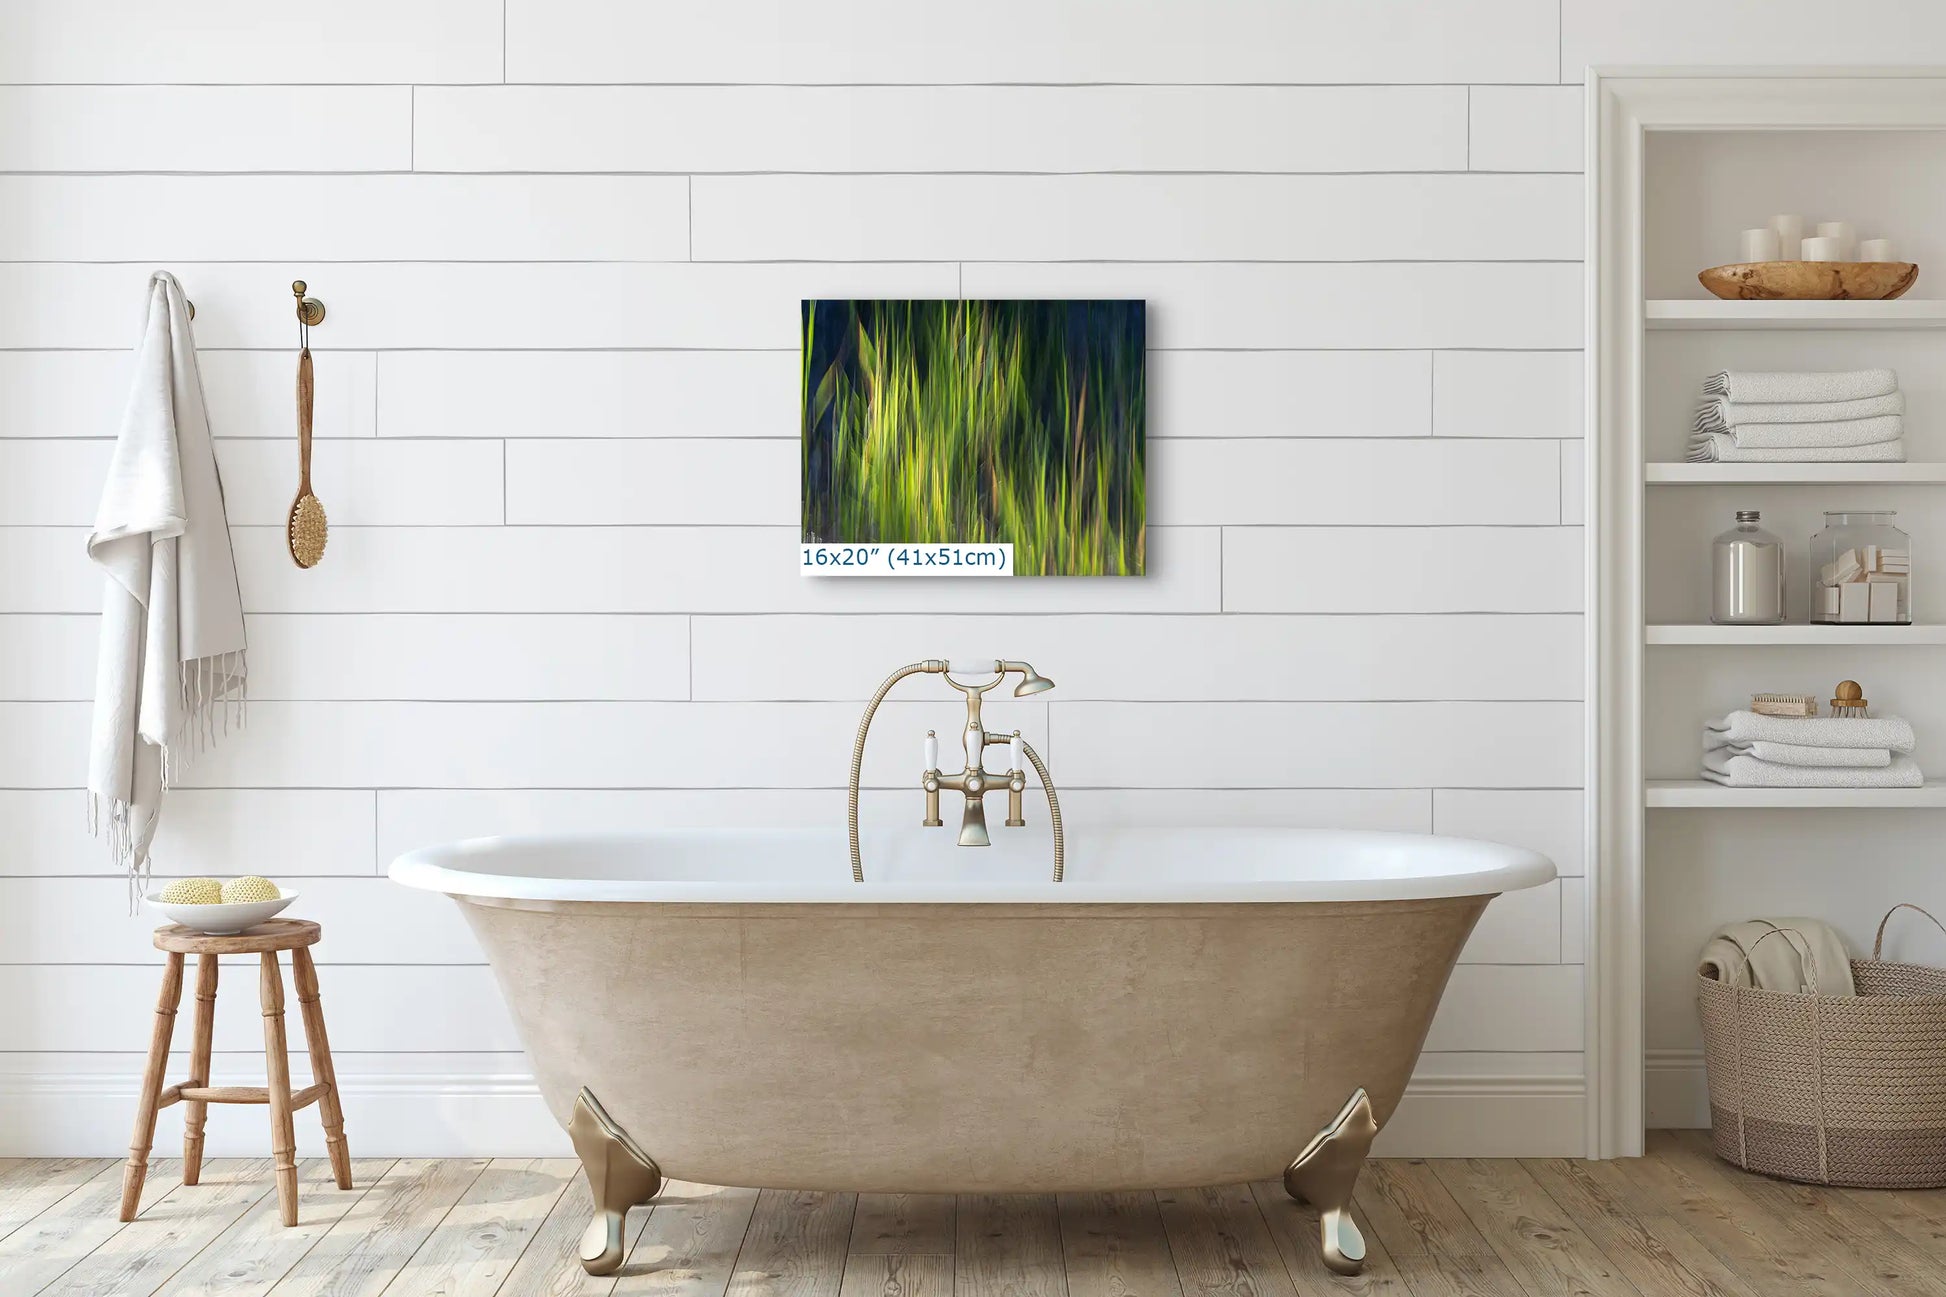 A 16"x20" green and yellow abstract canvas art hanging above a vintage bathtub, contributing a pop of color and dynamic to the serene, white bathroom setting.